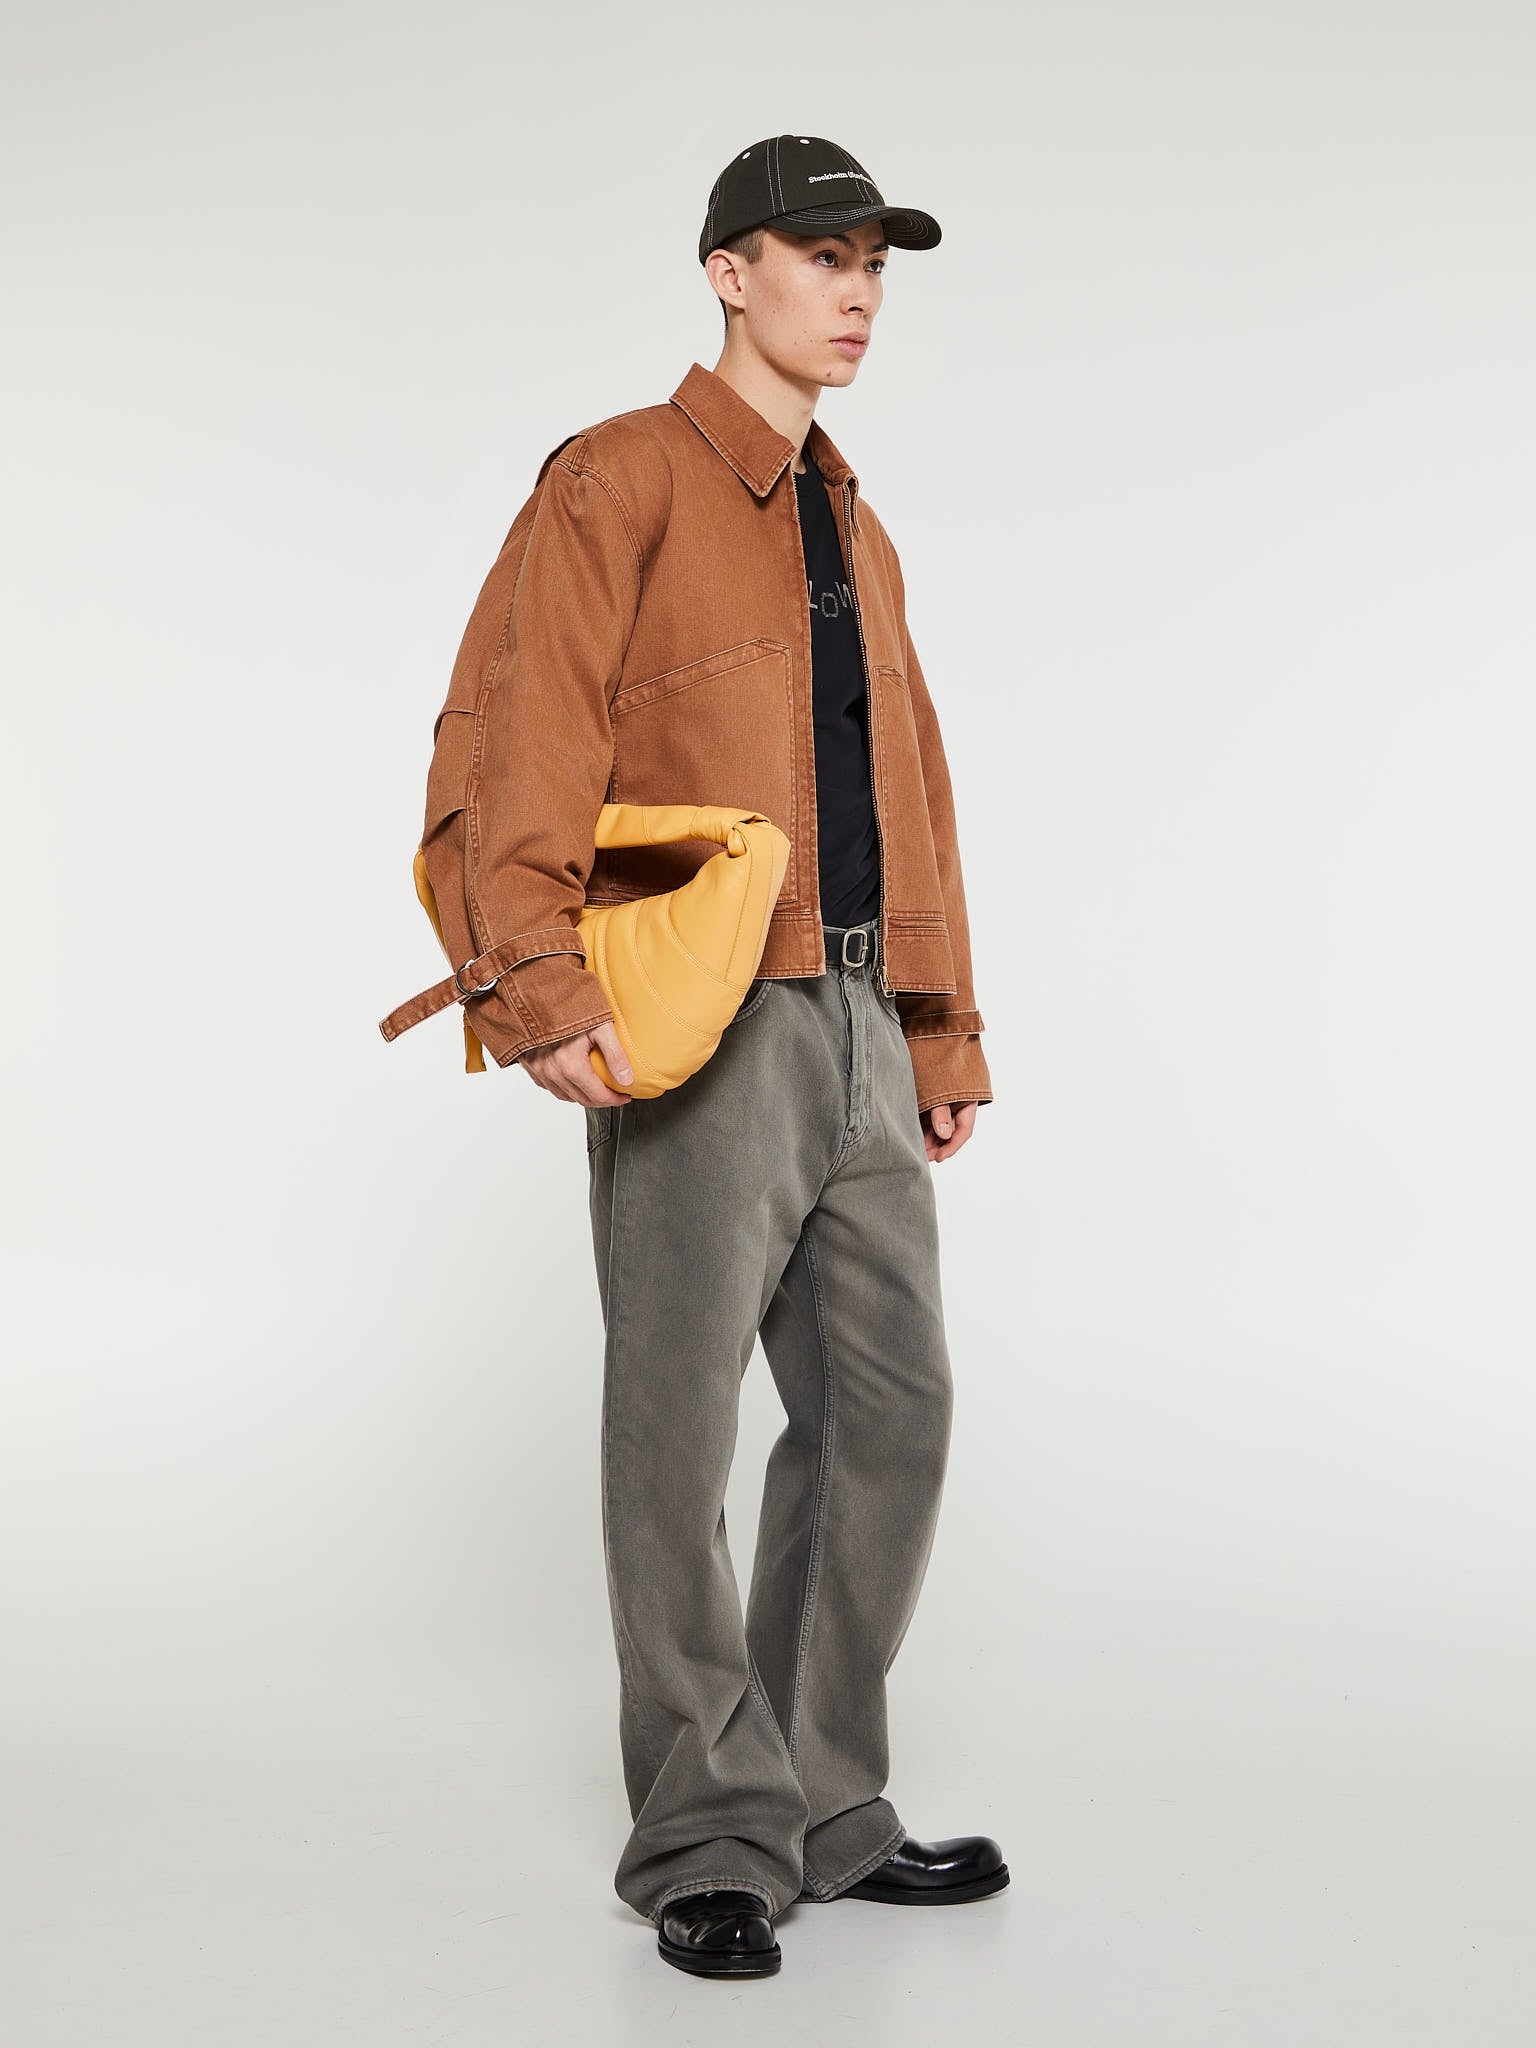 Acne Studios | Shop new arrivals from Acne Studios at stoy